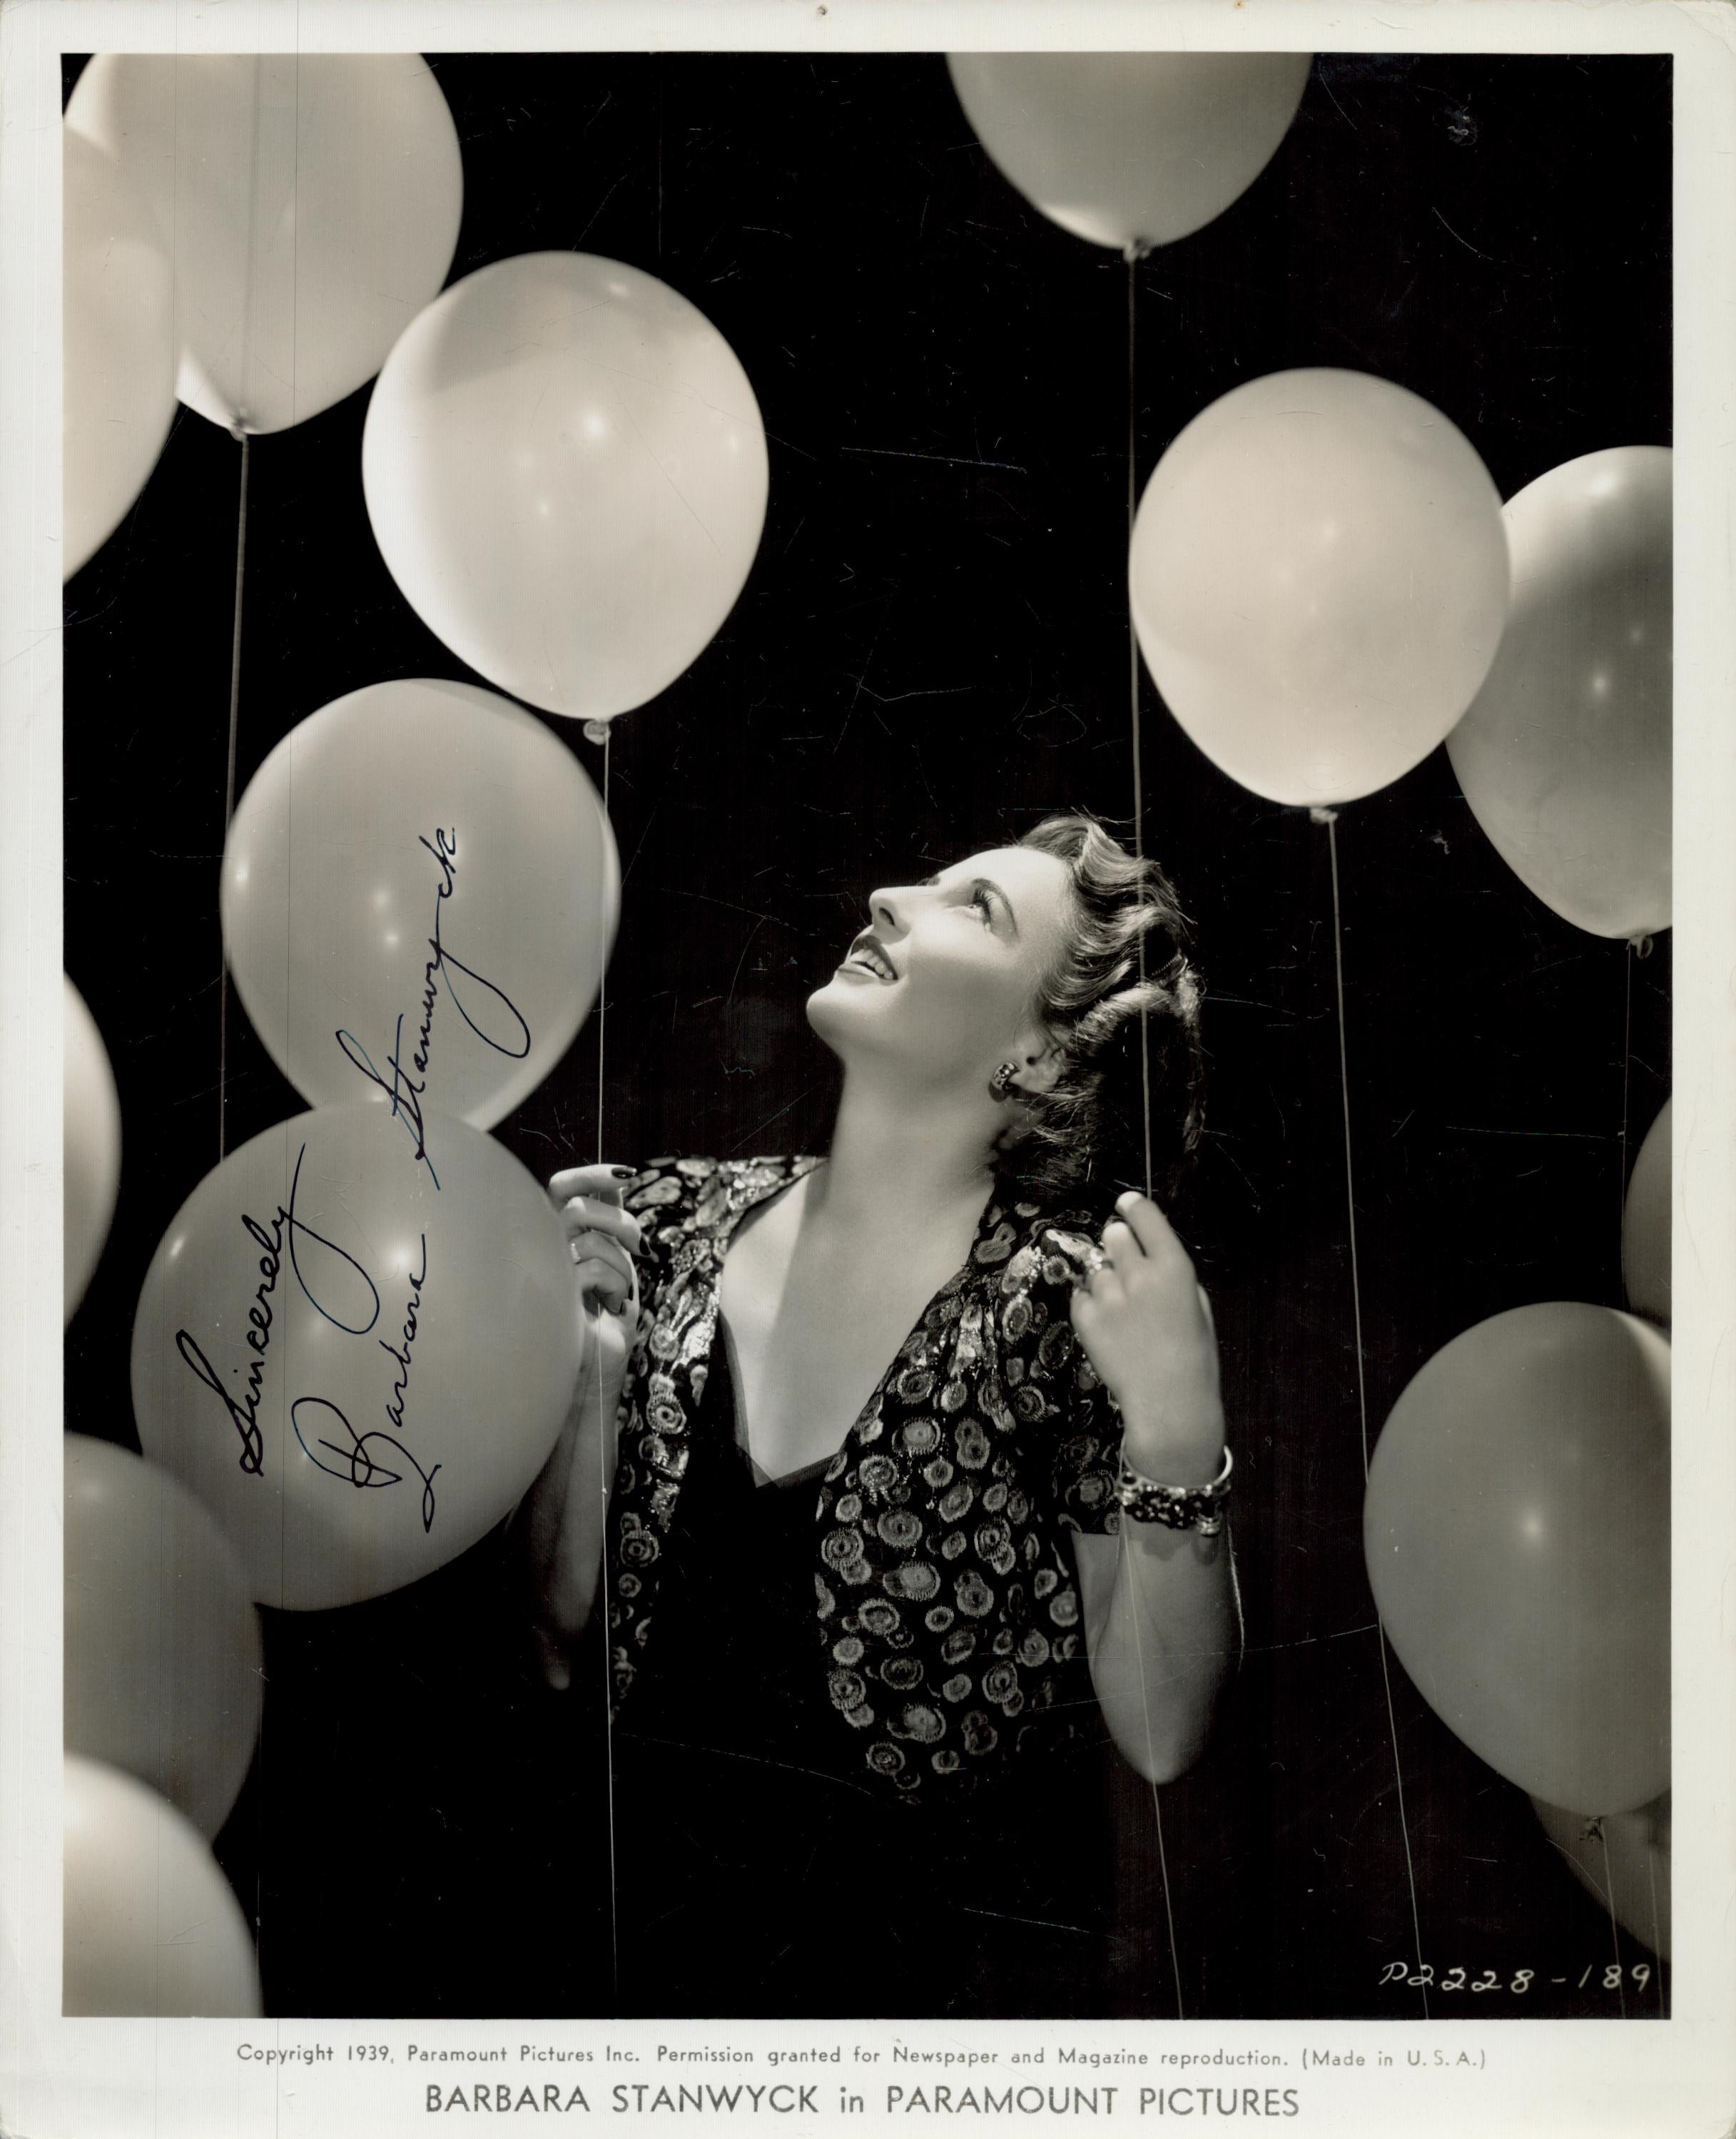 Barbara Stanwyck signed 10x8 inch vintage black and white photo. Good Condition. All autographs come